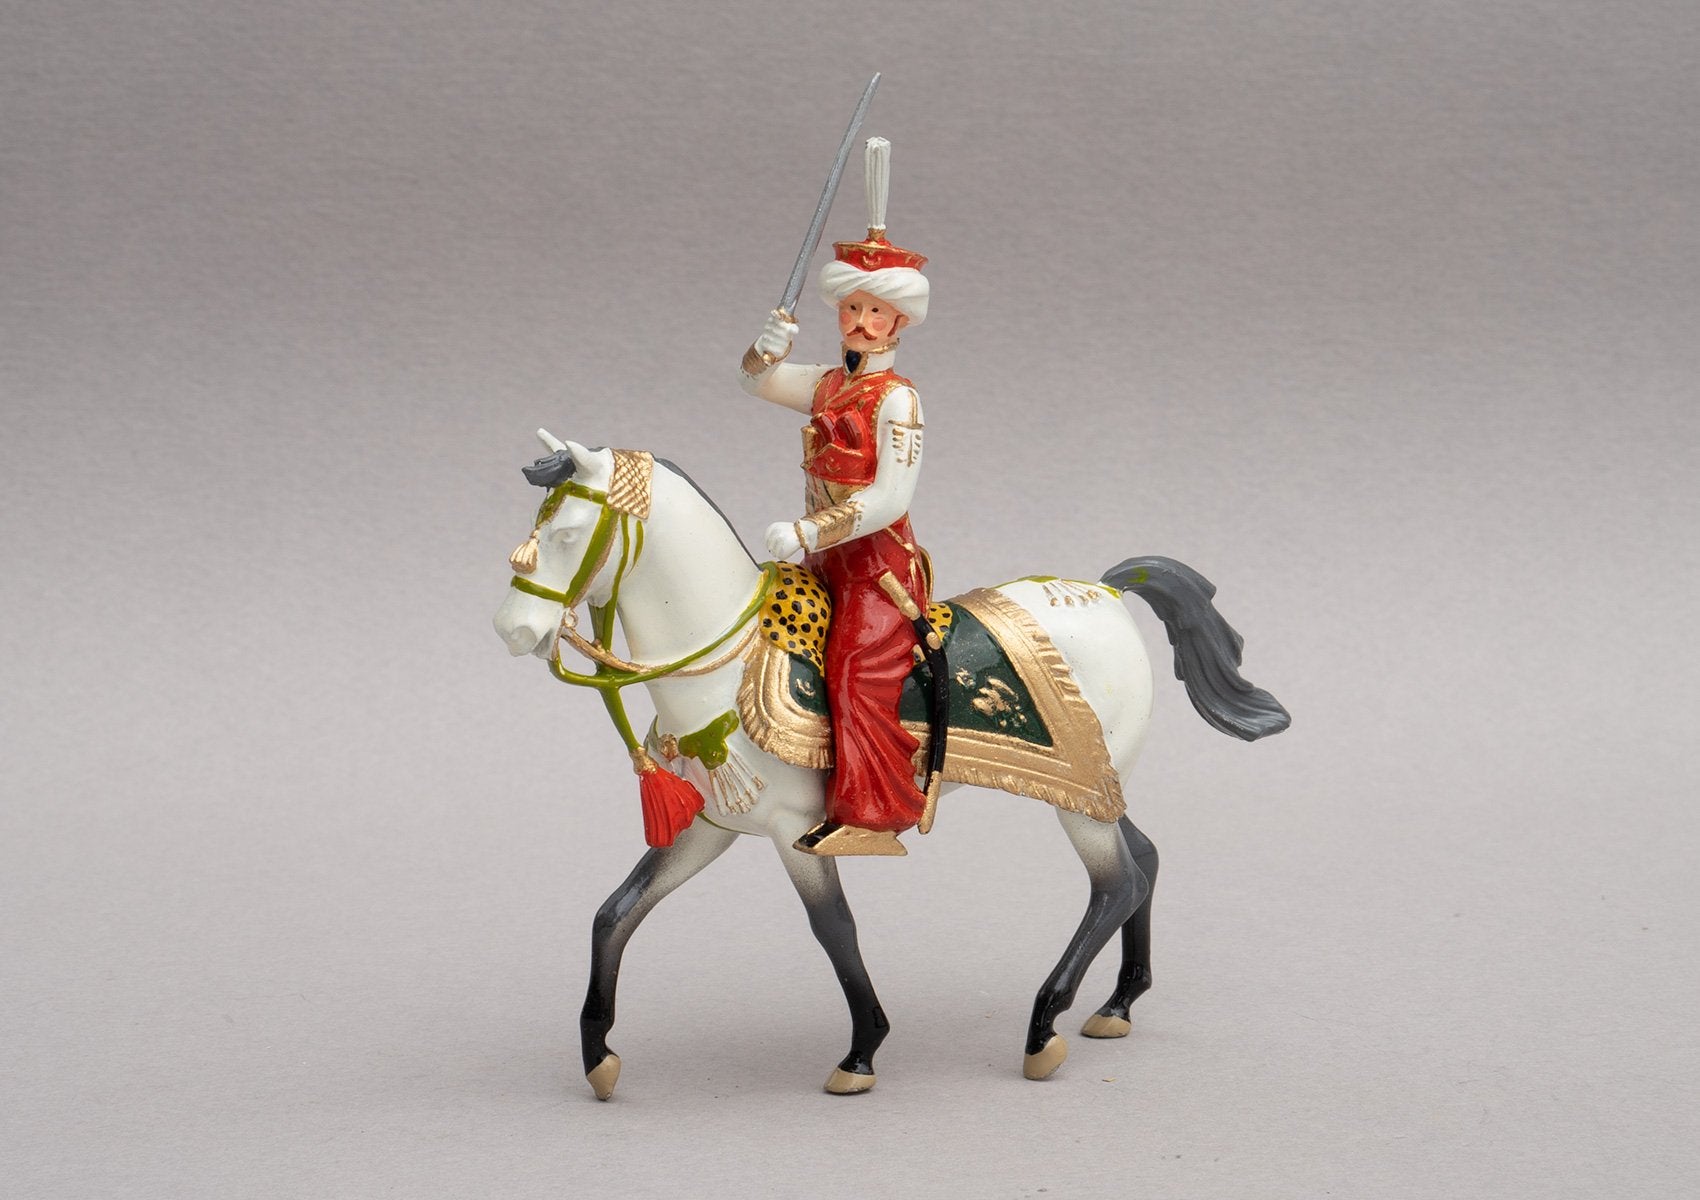 Set 118 Chef de escardon Mamelukes Kiman | French Cavalry | Napoleonic Wars | Commander of Marmeluke cavalry. Uniform is of Syrian and Turkish Mameluke pattern; turban, sleeved chemise, arab sash, charoual-style trousers, and Mameluke sabre. Single mounted officer on grey horse | Waterloo | © Imperial Productions | Sculpt by David Cowe